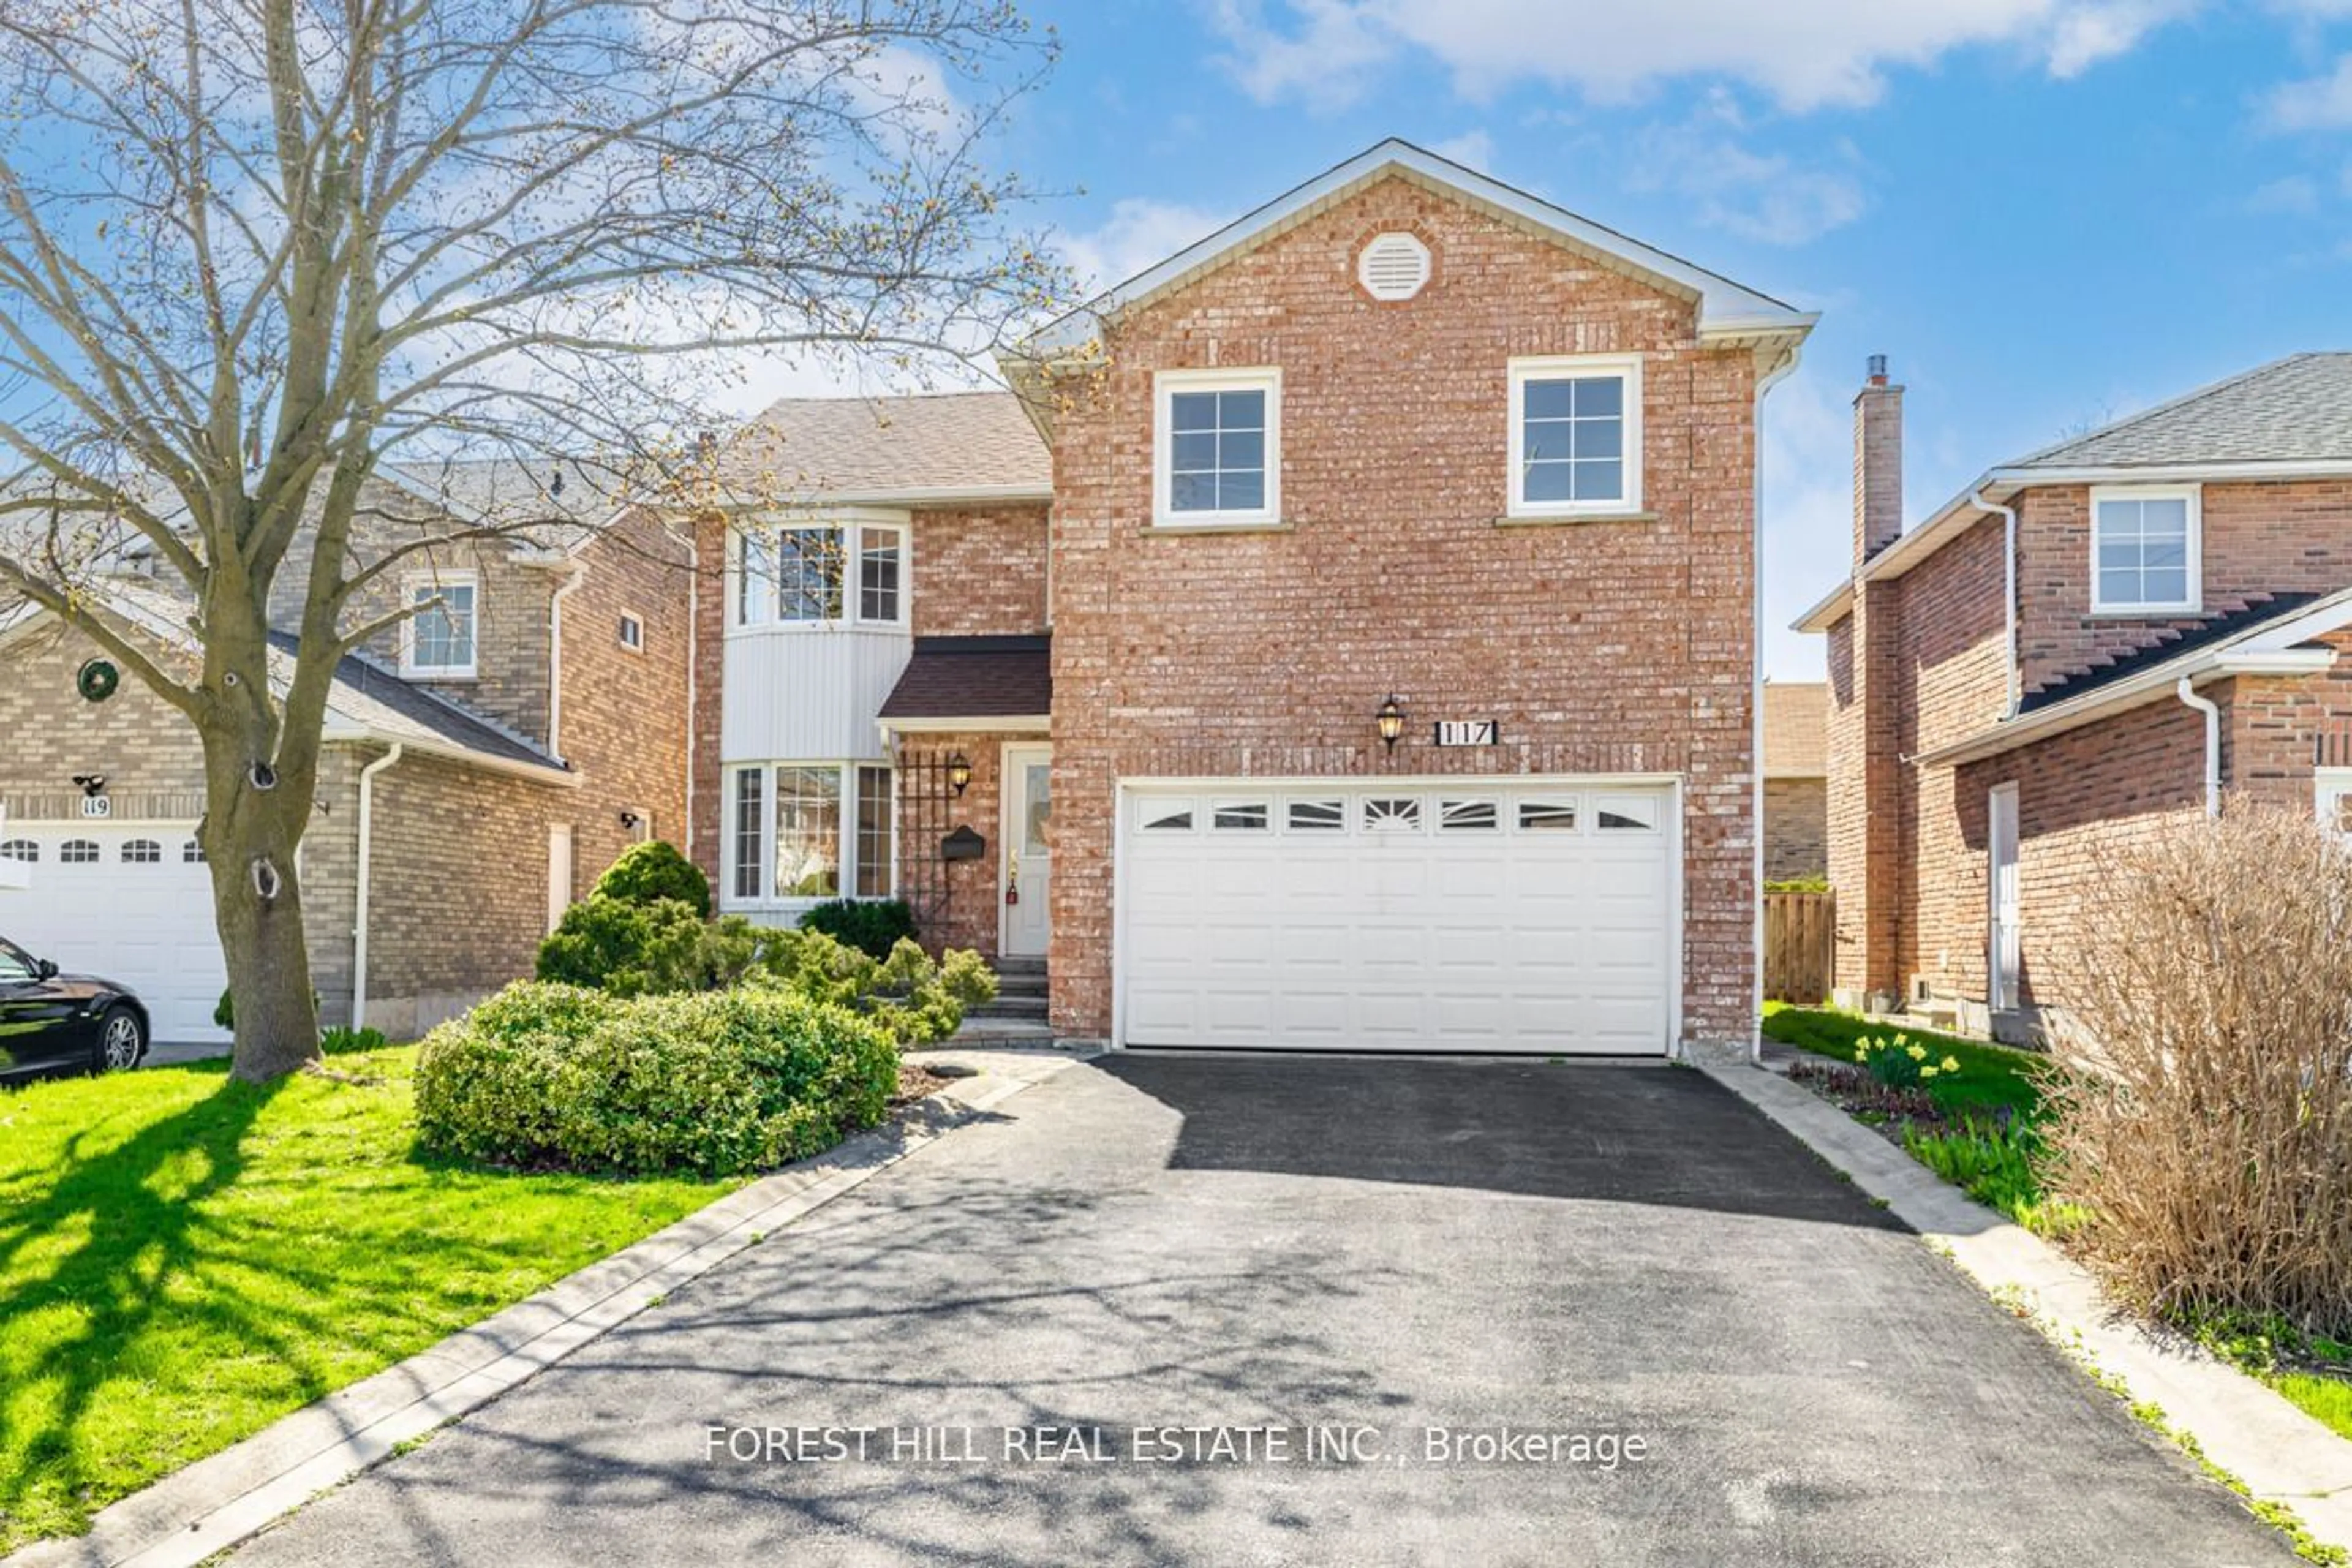 Home with brick exterior material for 117 Eleanor Circ, Richmond Hill Ontario L4C 6K6